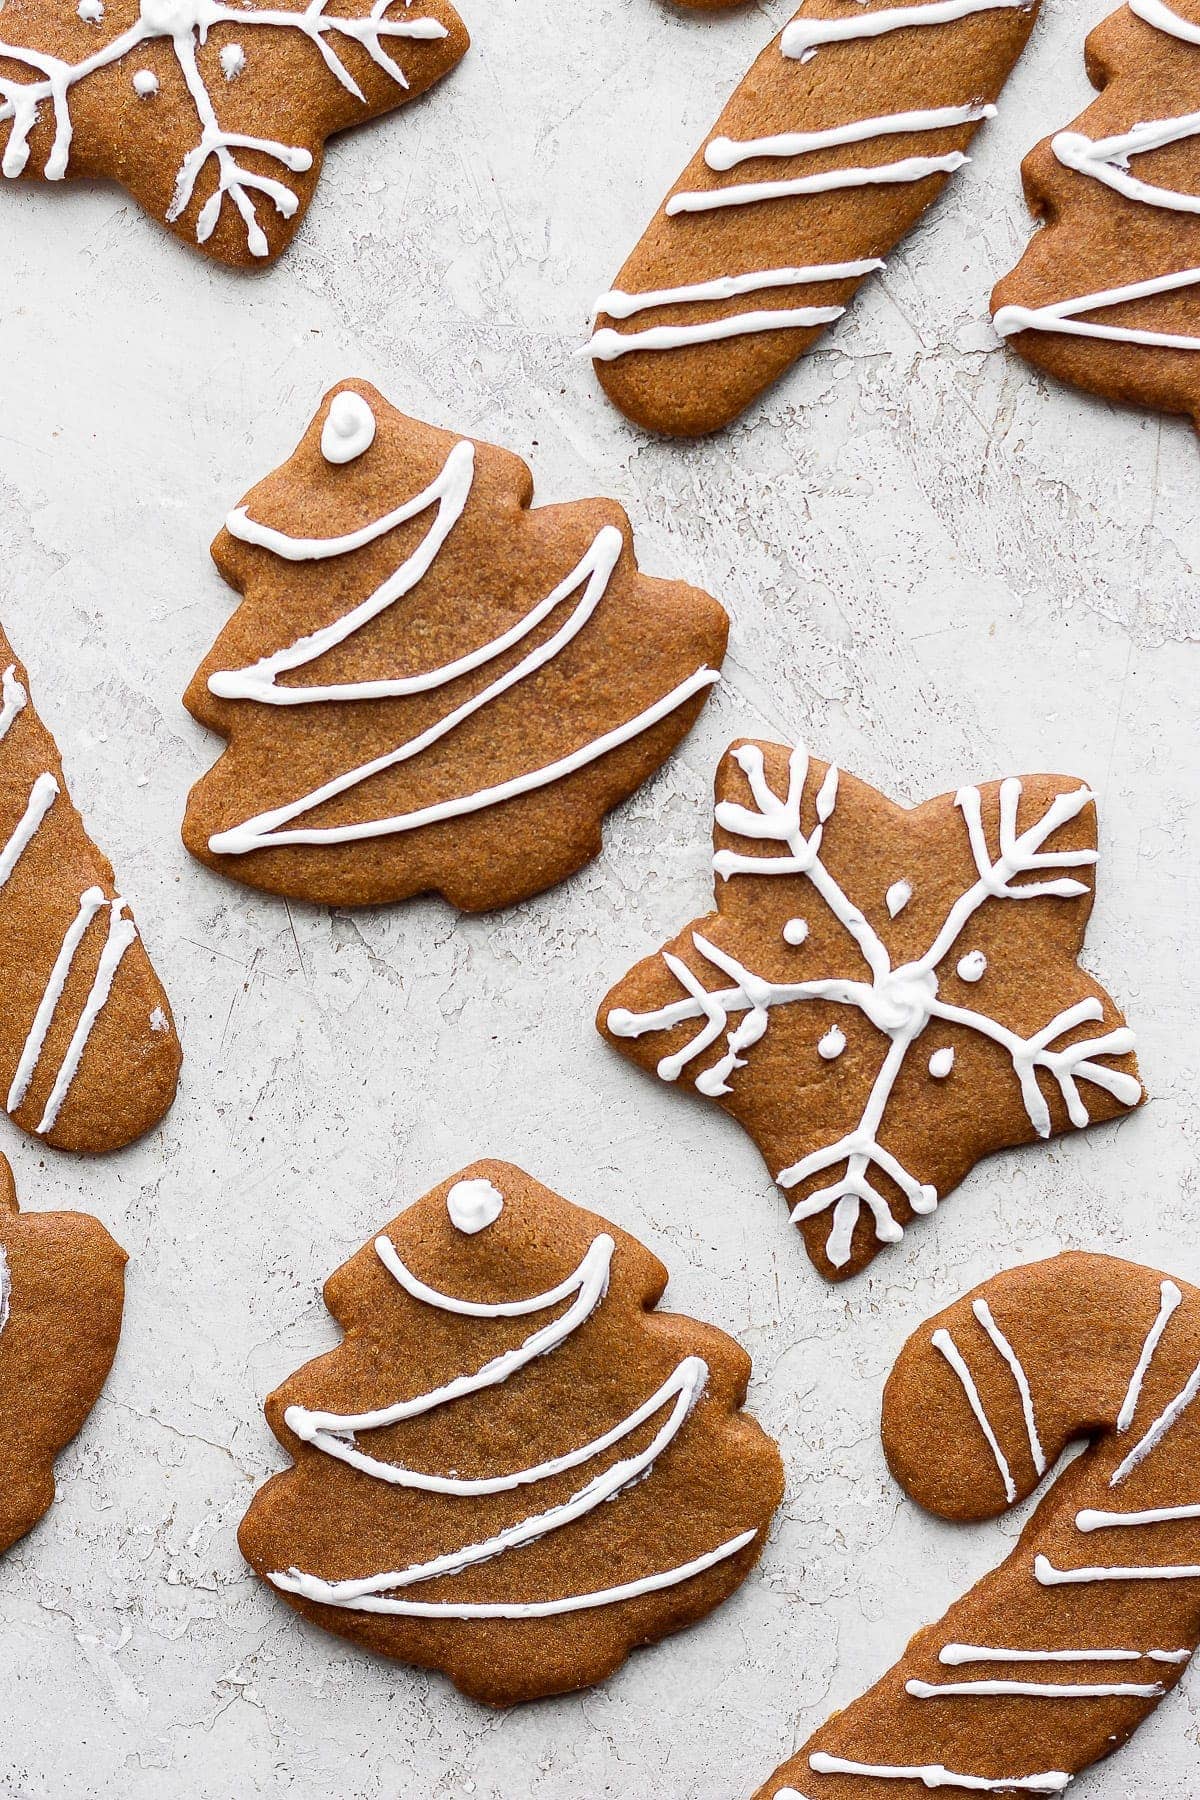 https://fitfoodiefinds.com/wp-content/uploads/2020/11/gingerbread-cut-out-cookies-11.jpg